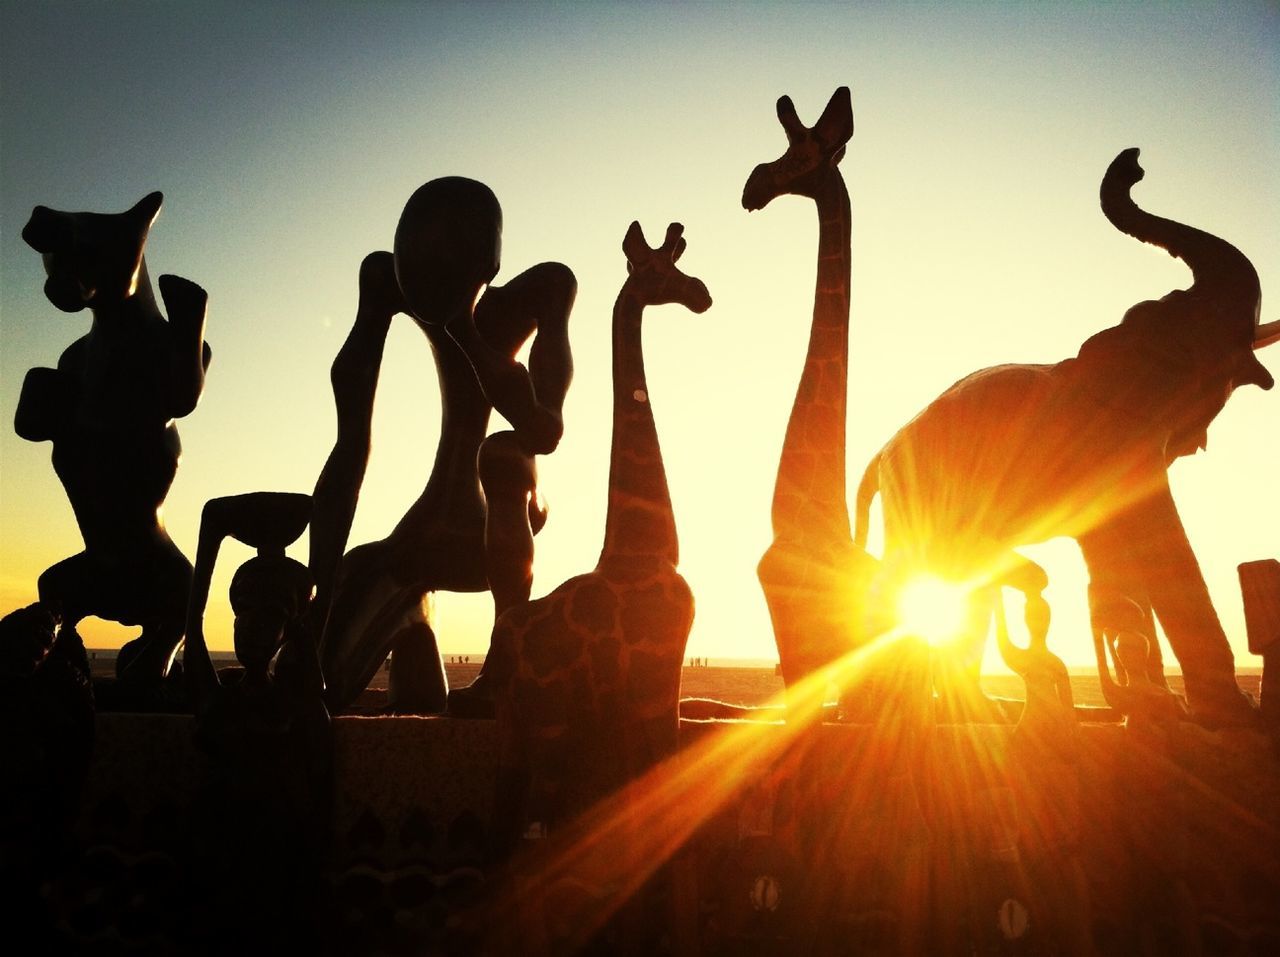 Figurines against clear sky during sunset